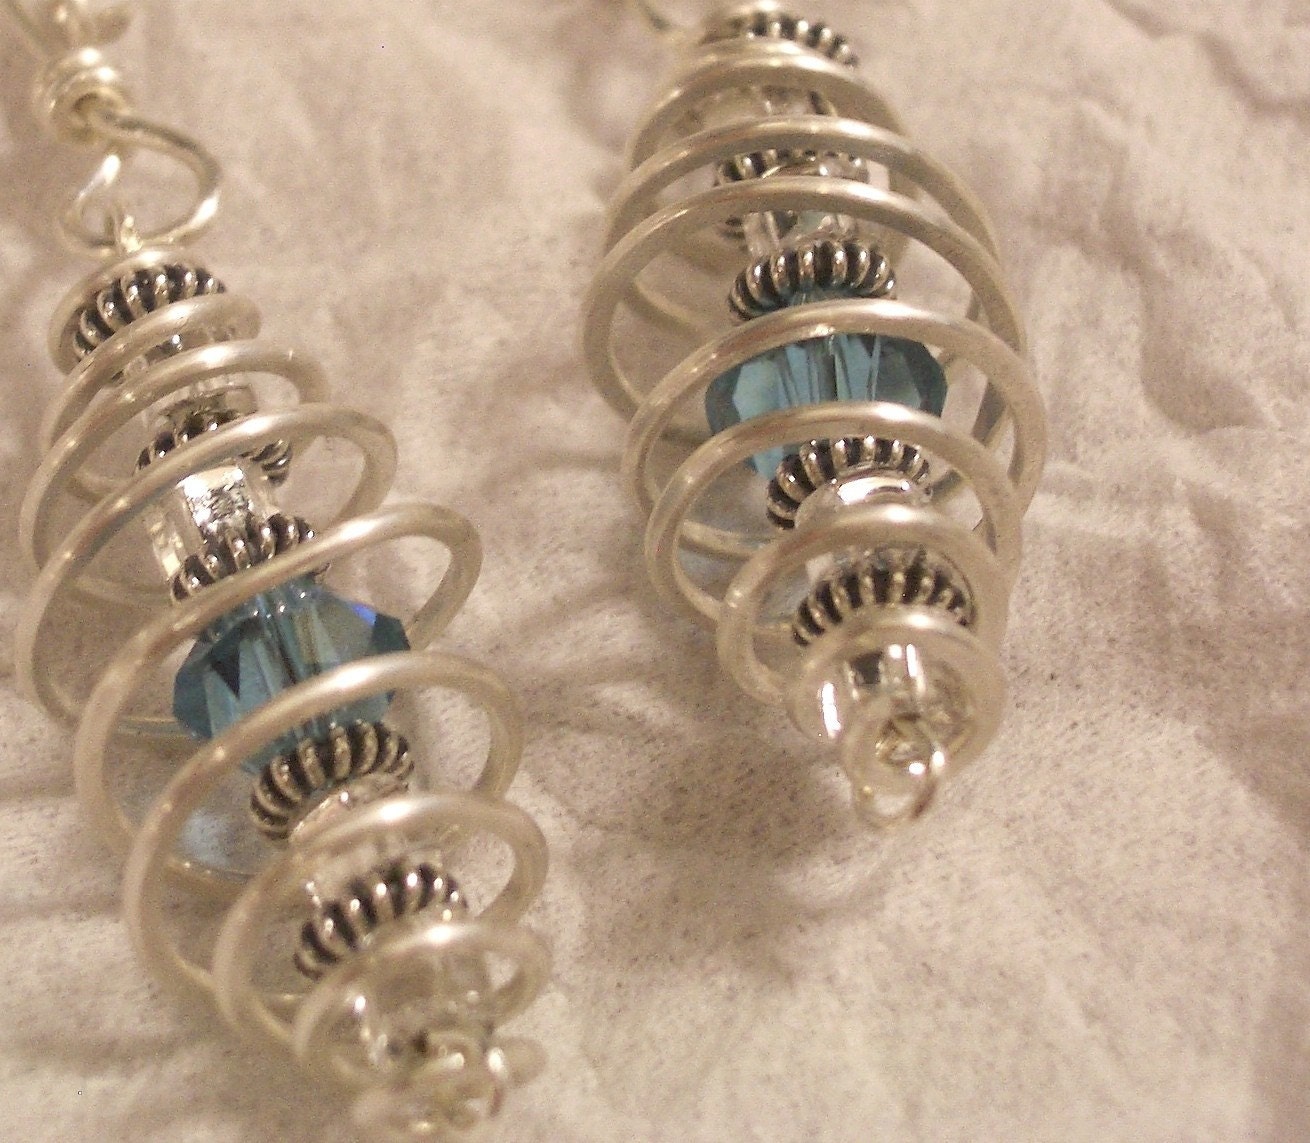 Aqua Swarovski Crystal in Sterling Silver Spiral cage - Hook earrings - Free Shipping